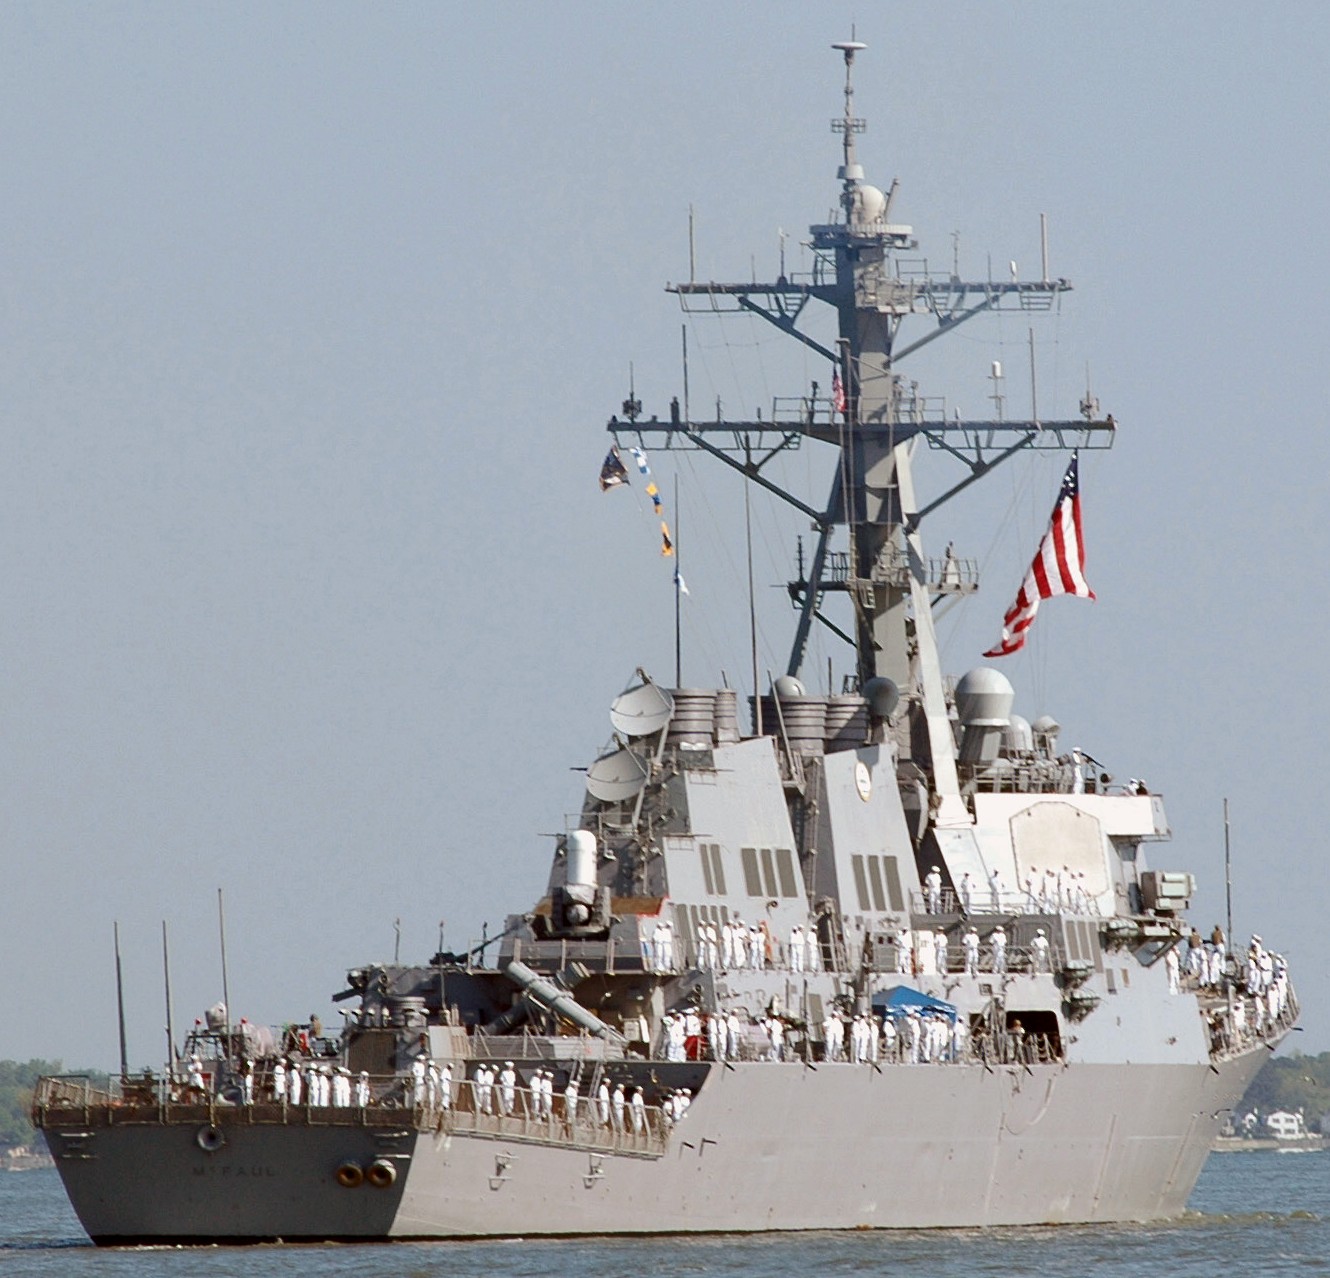 ddg-74 uss mcfaul guided missile destroyer arleigh burke class aegis bmd 59